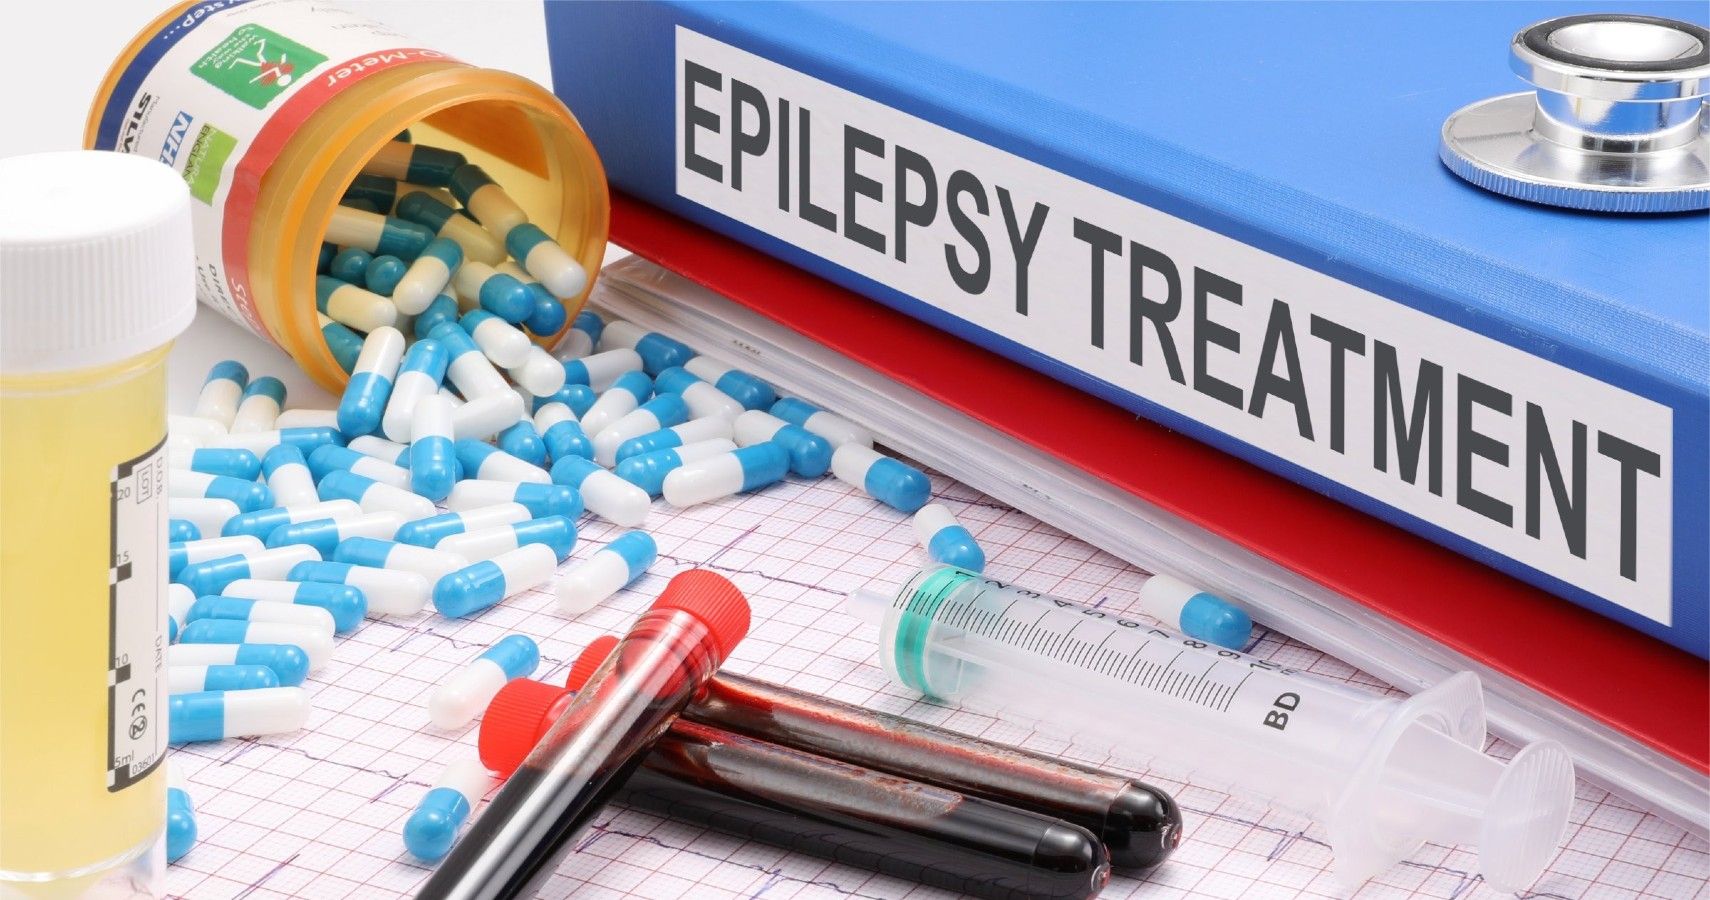 Epilepsy Medication During Pregnancy Not Linked To Cognitive Issues In Babies, Per Study